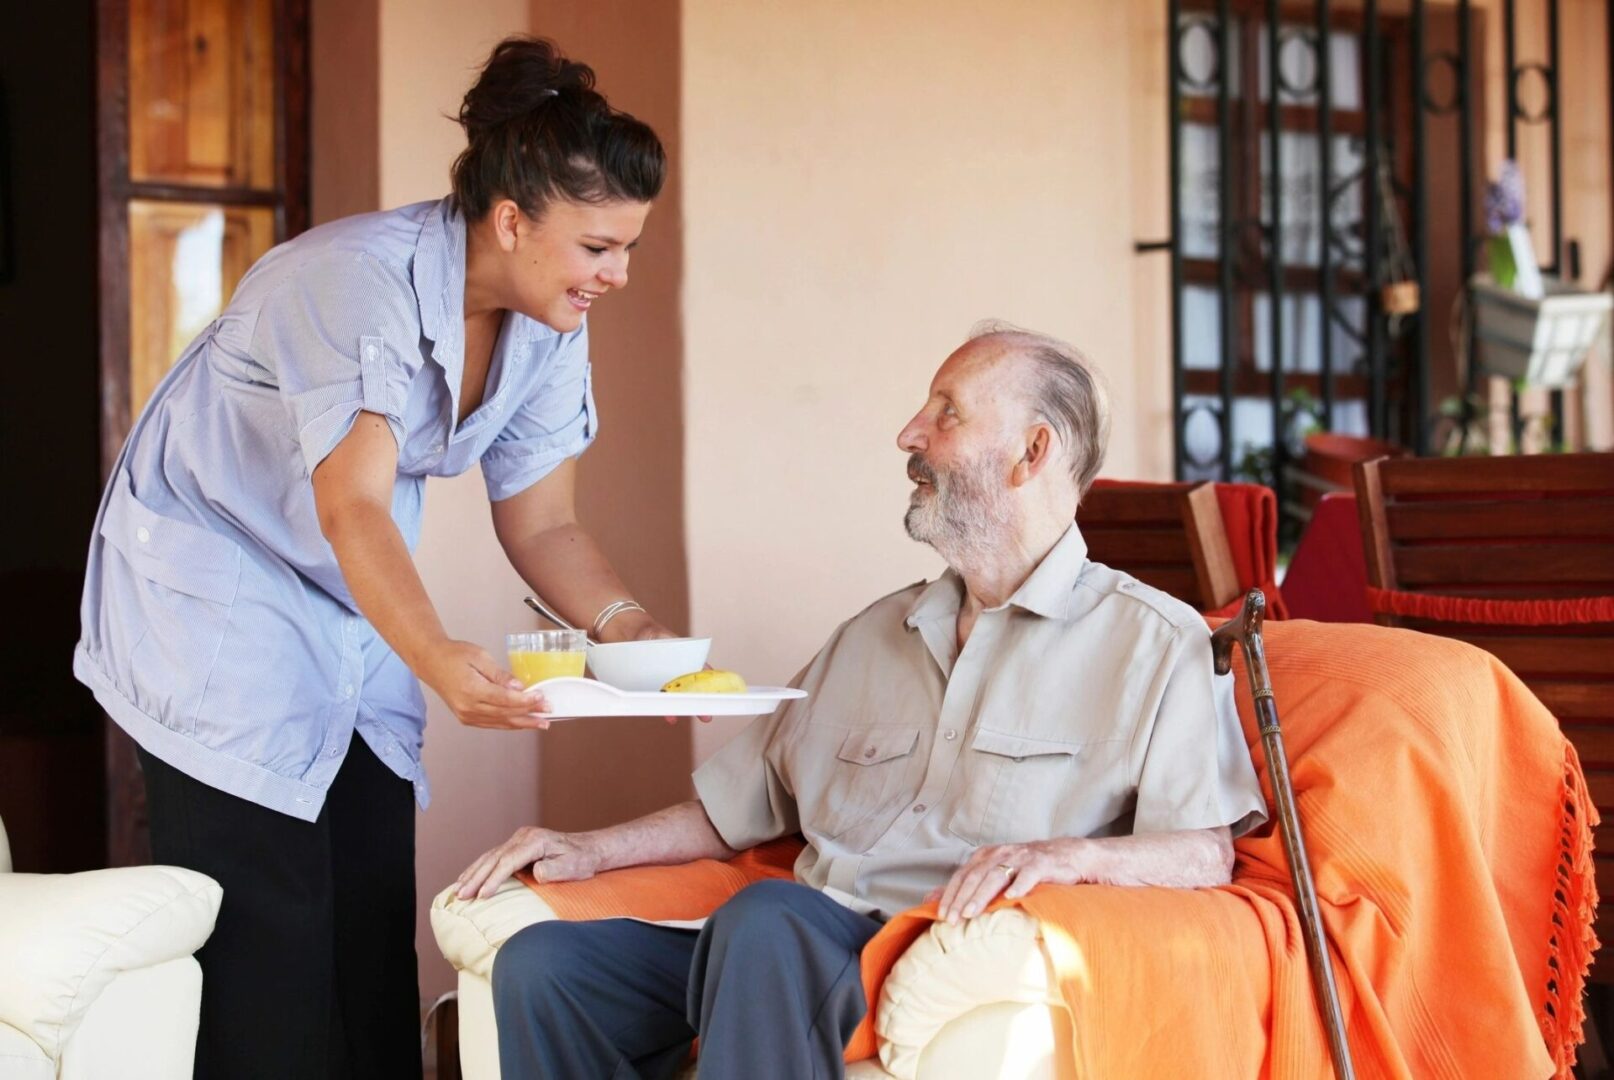 Nurse giving food to patient